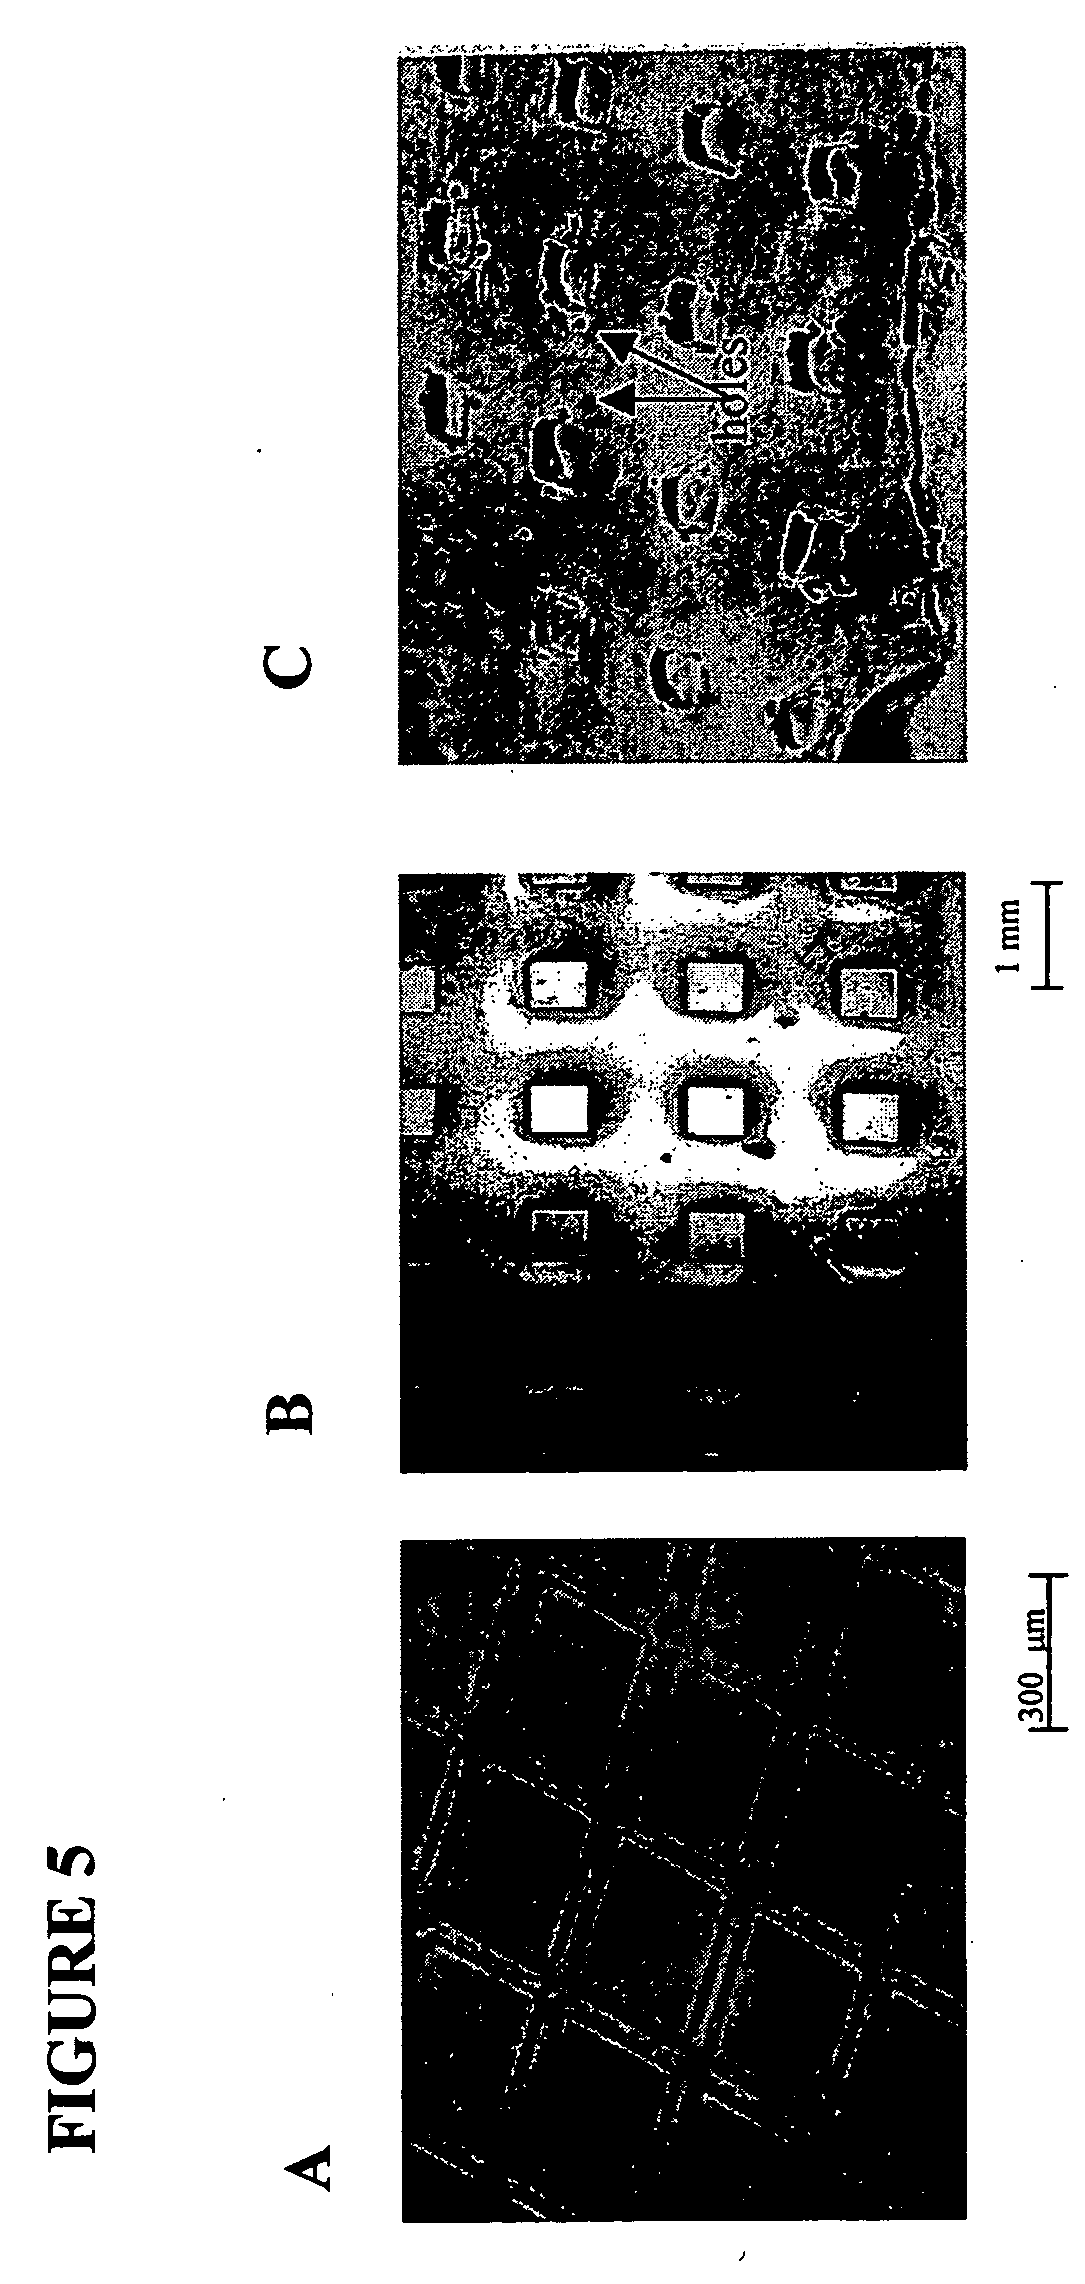 Microfabricated biopolymer scaffolds and method of making same